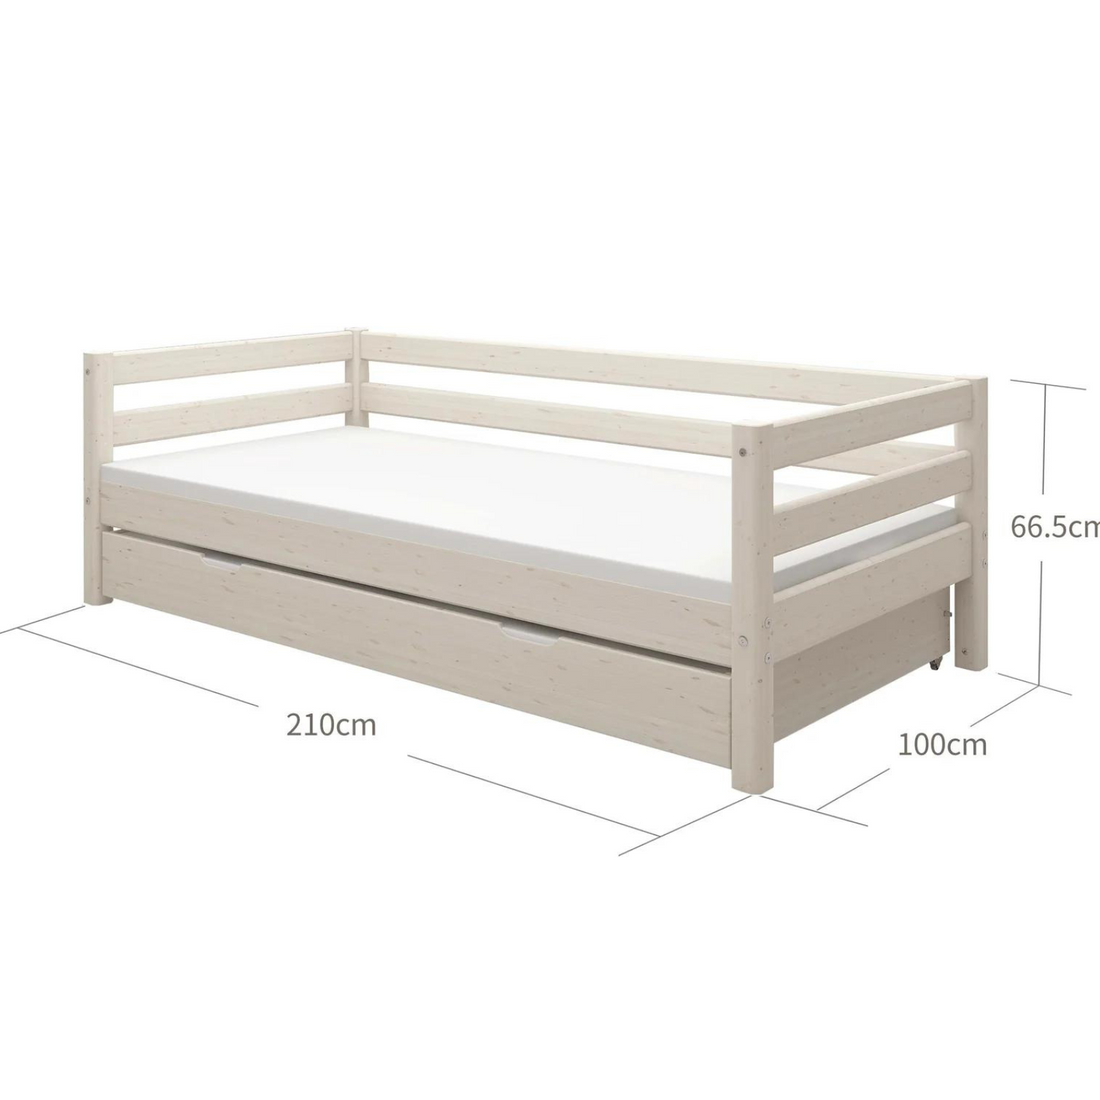 FLEXA Single Bed with pull-out bed CLASSIC Collection dimensions